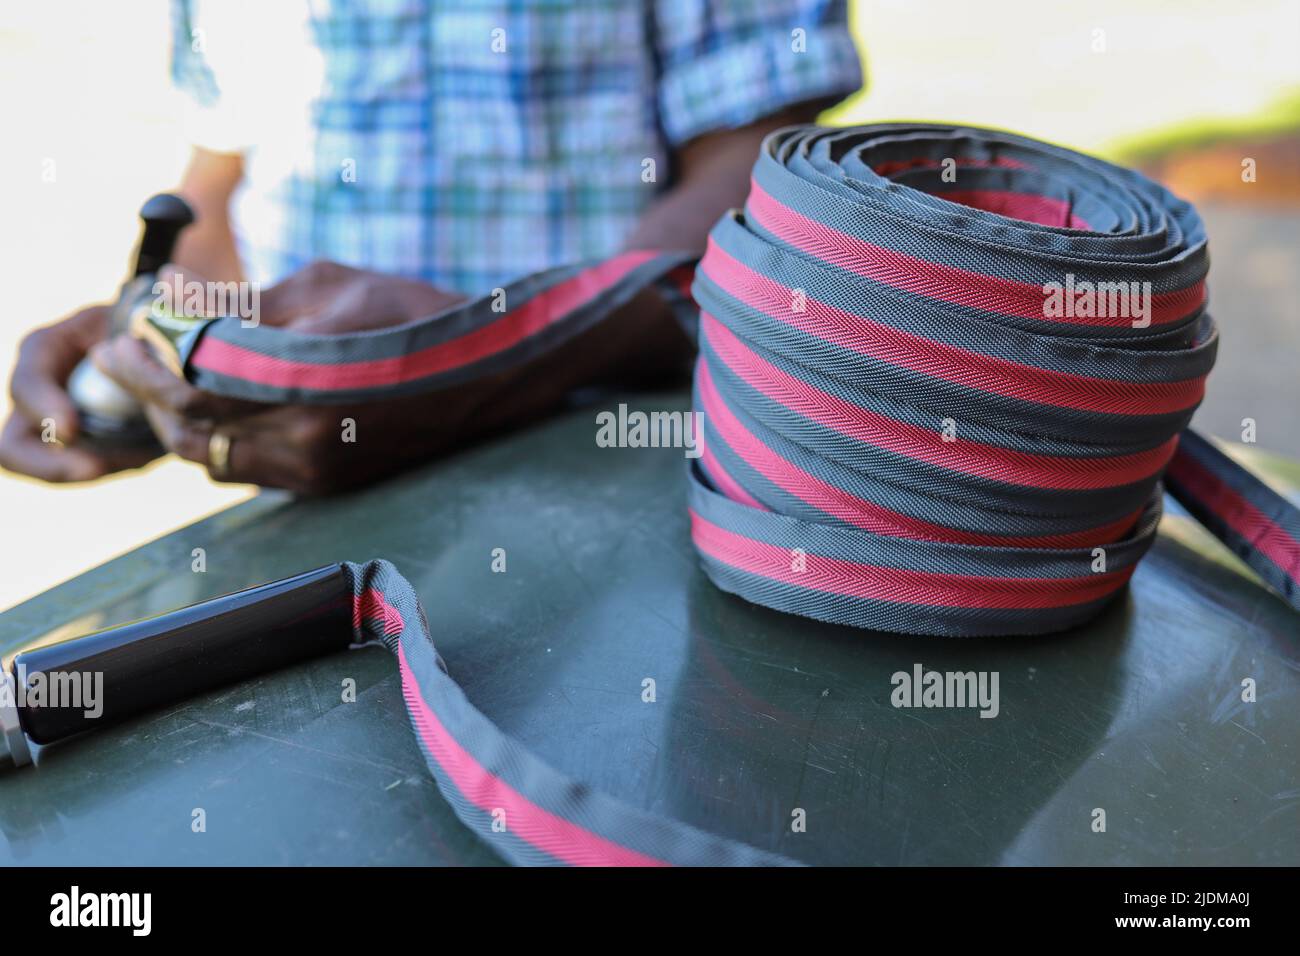 A close-up of a red and black water hose Stock Photo